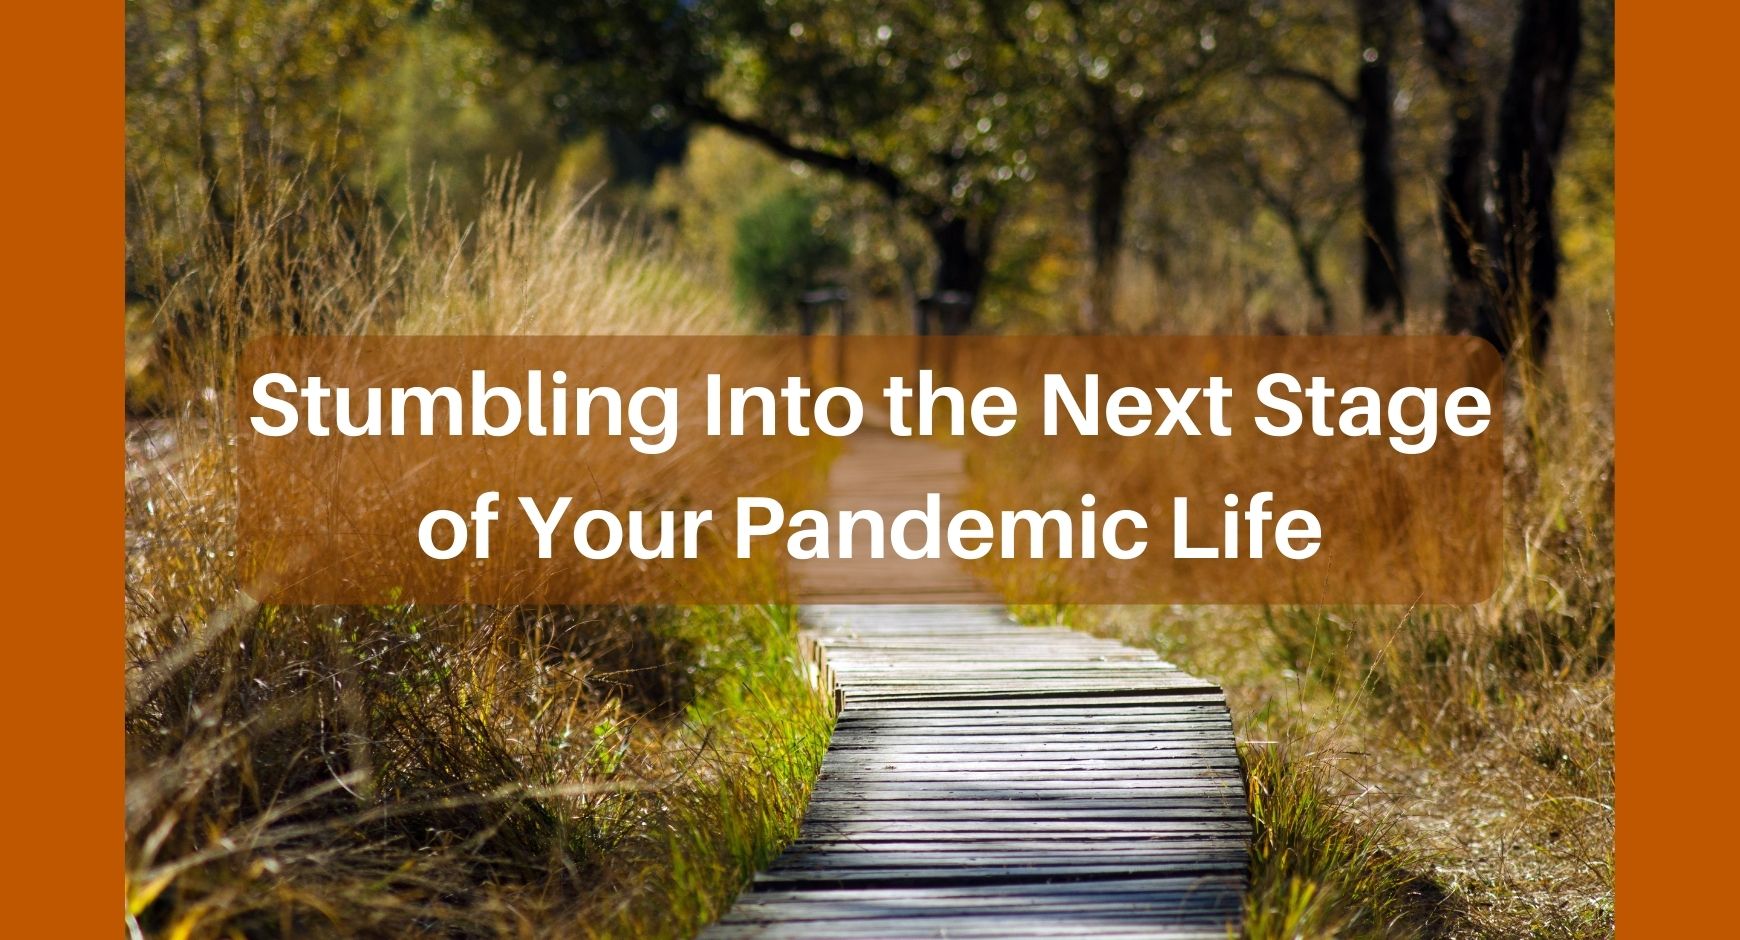 A winding wooden path in high grass under words that read "Stumbling Into the Next Stage of Your Pandemic Life"